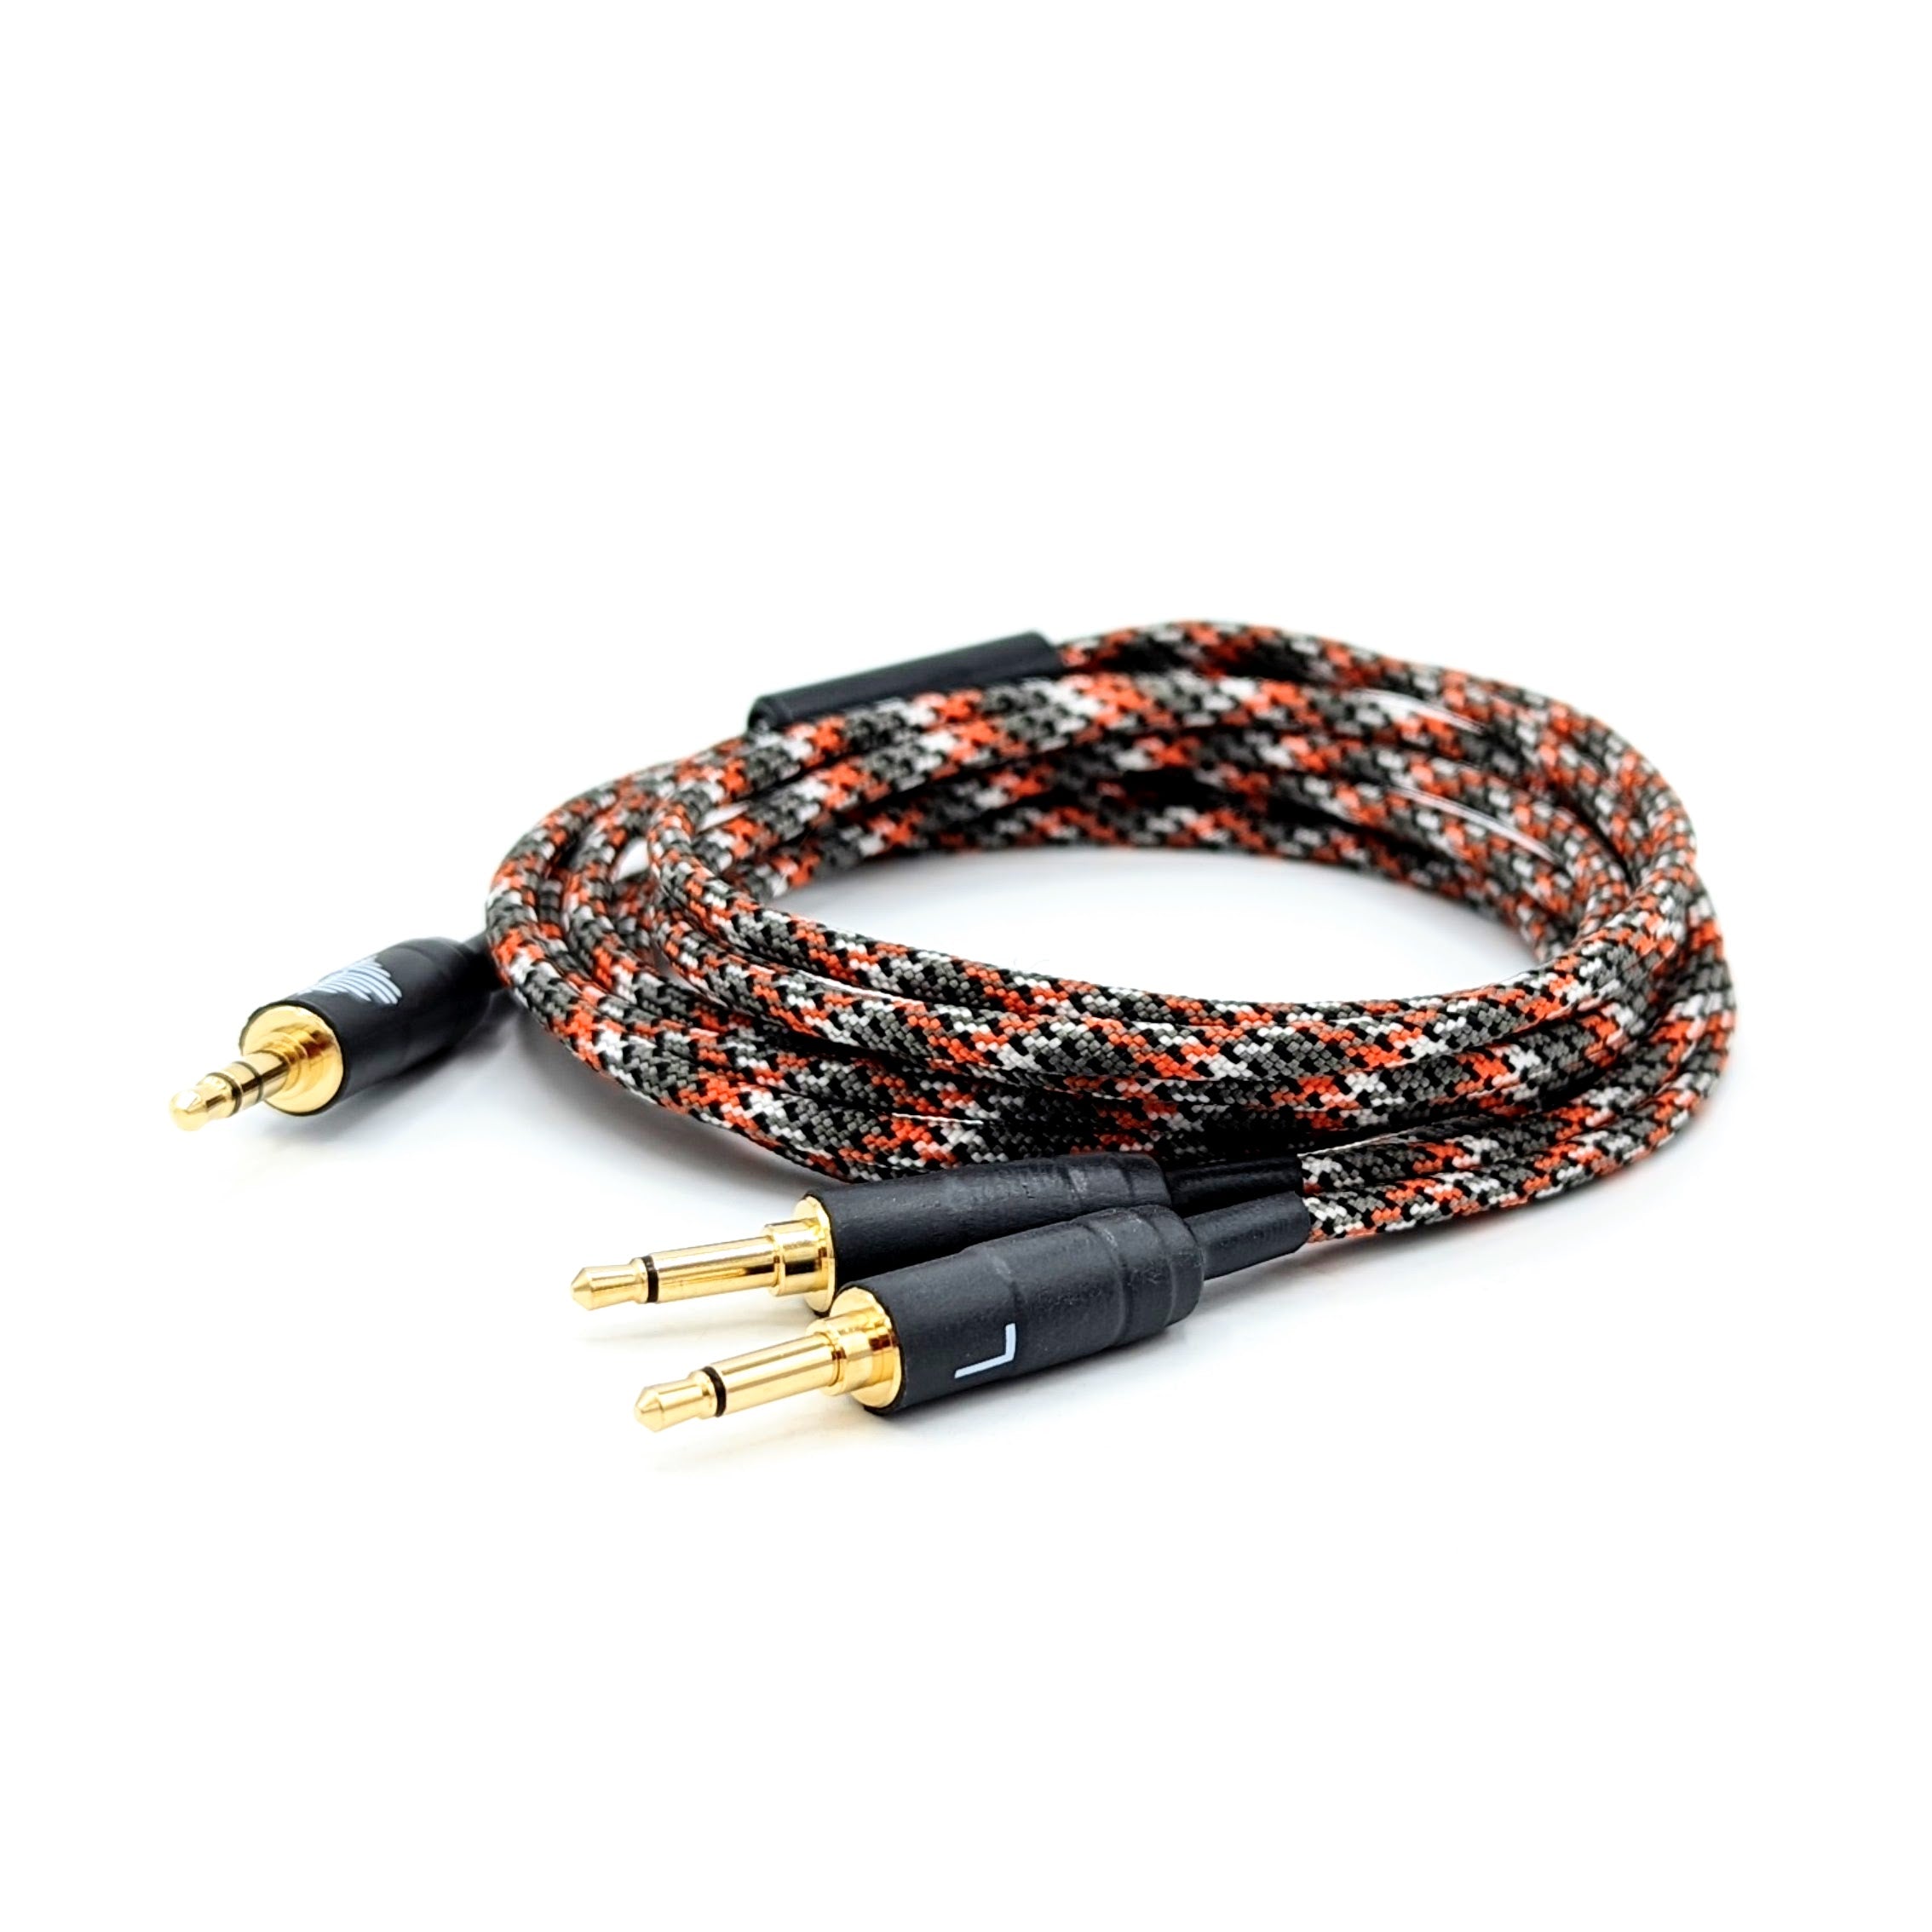 Custom Dual 3.5mm TRS headphone cable for Focal / Hifiman + more